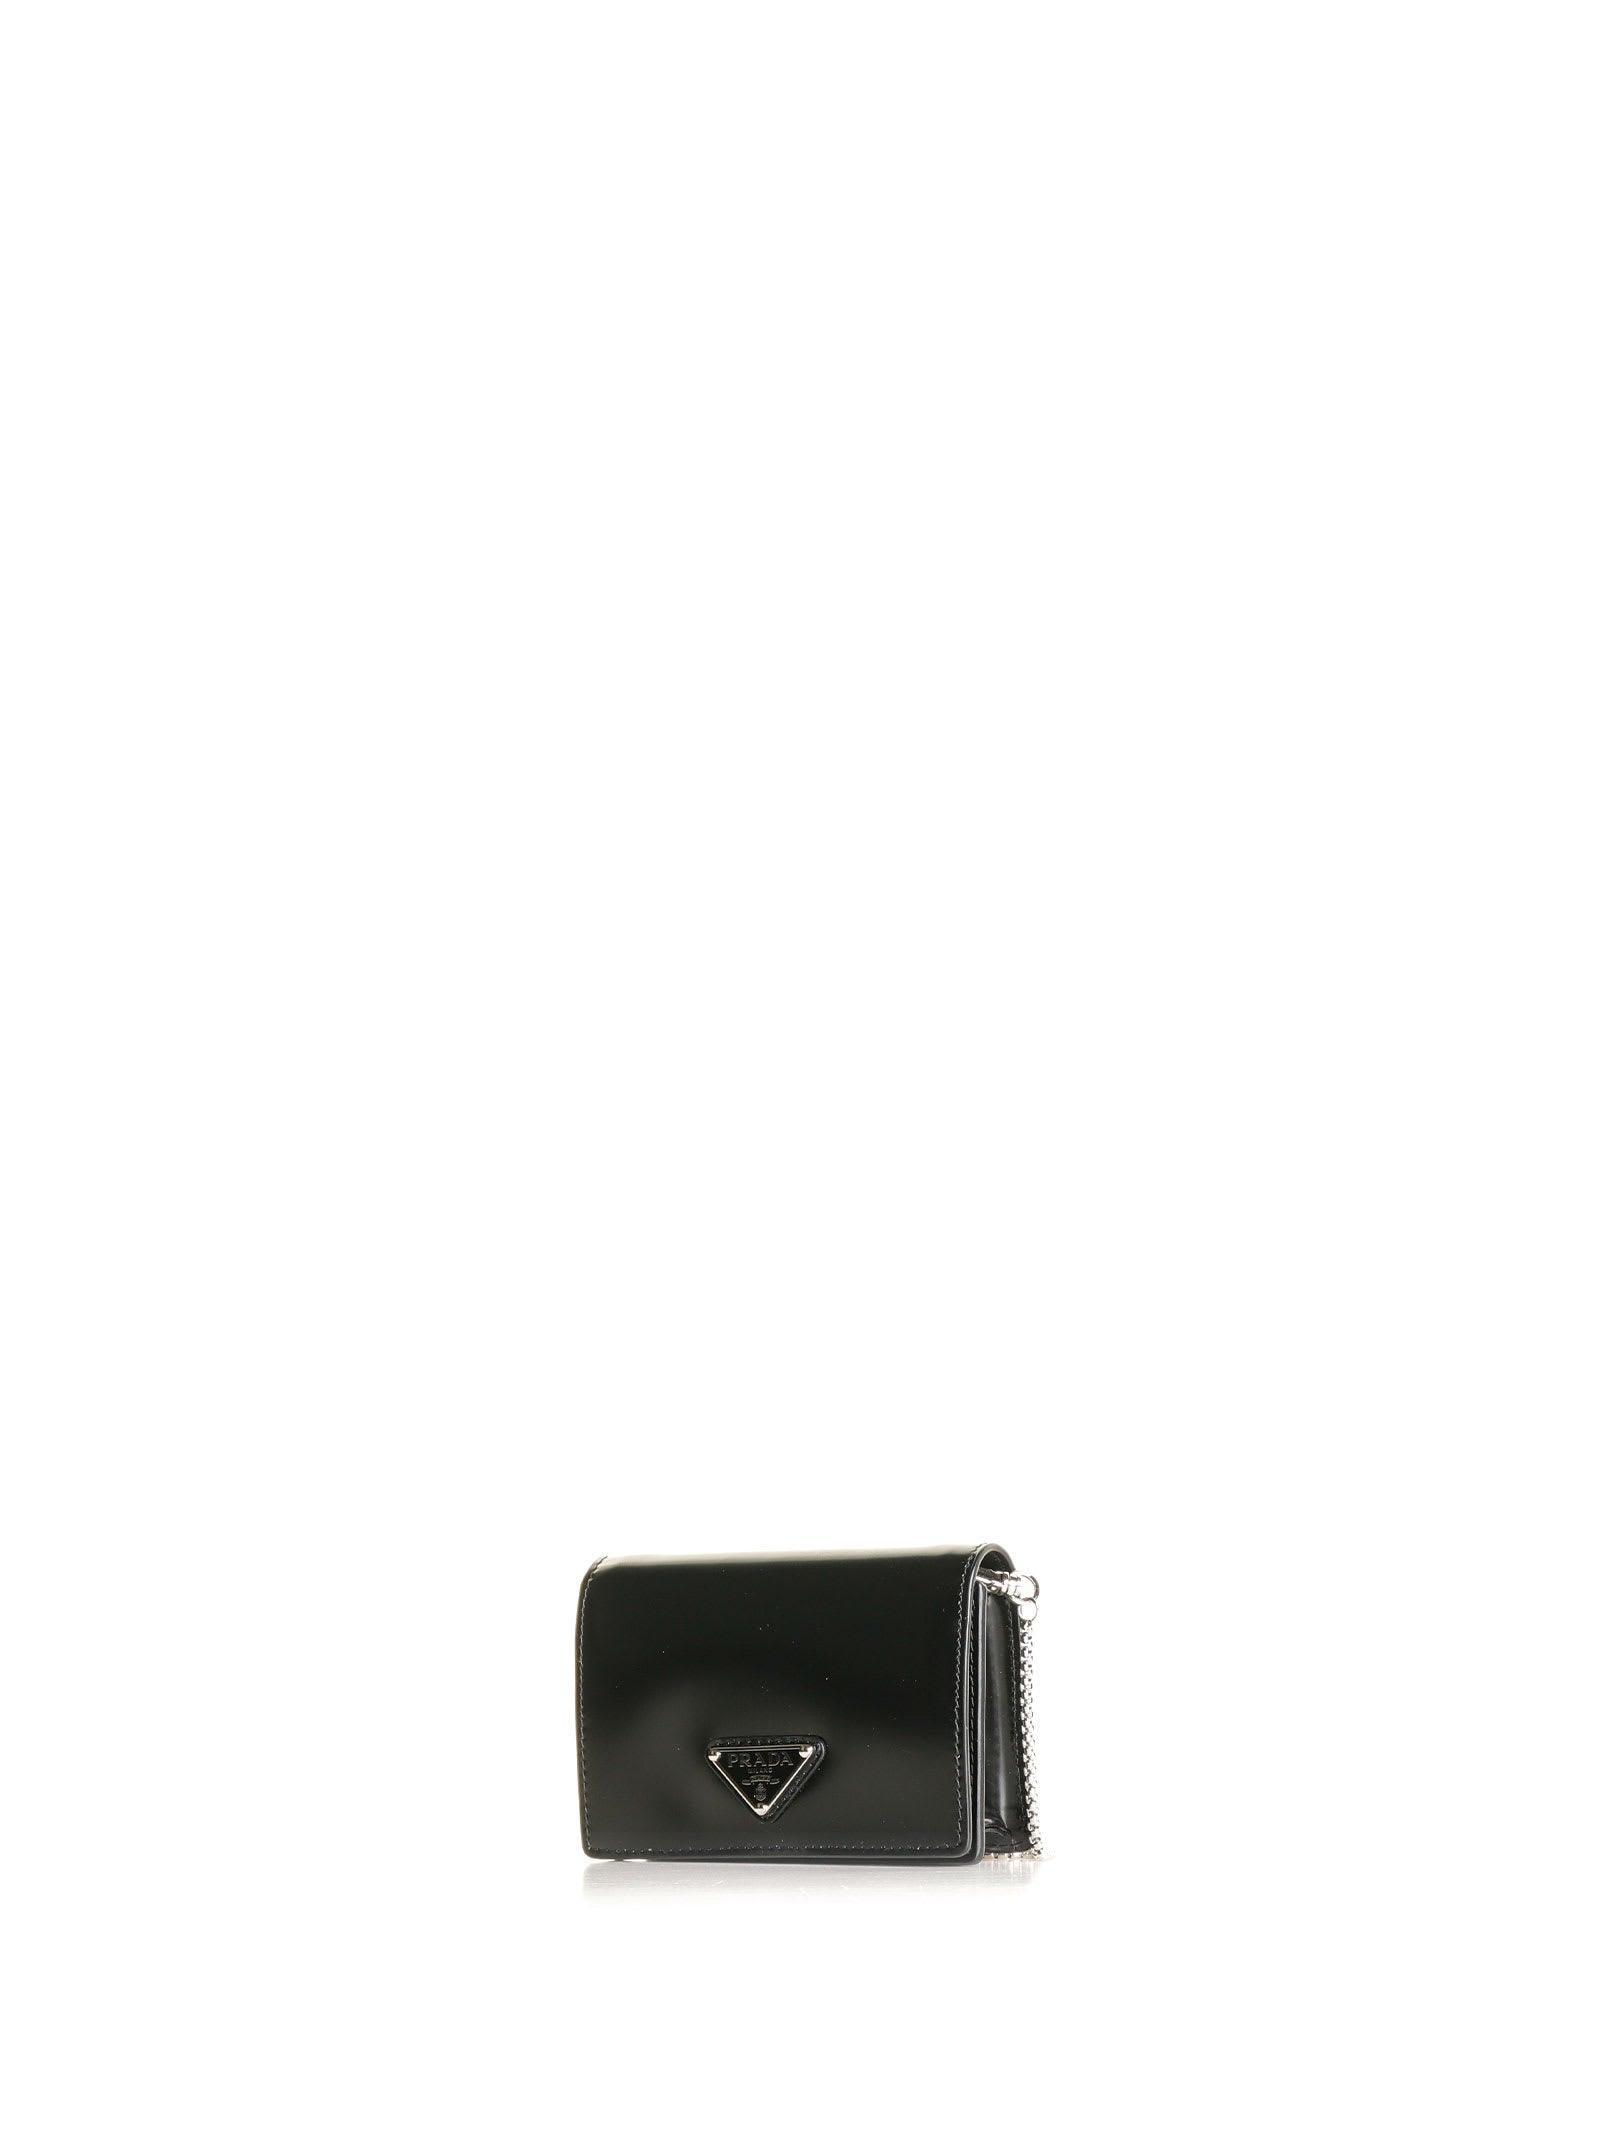 Prada Leather Card Holder With Shoulder Strap in White